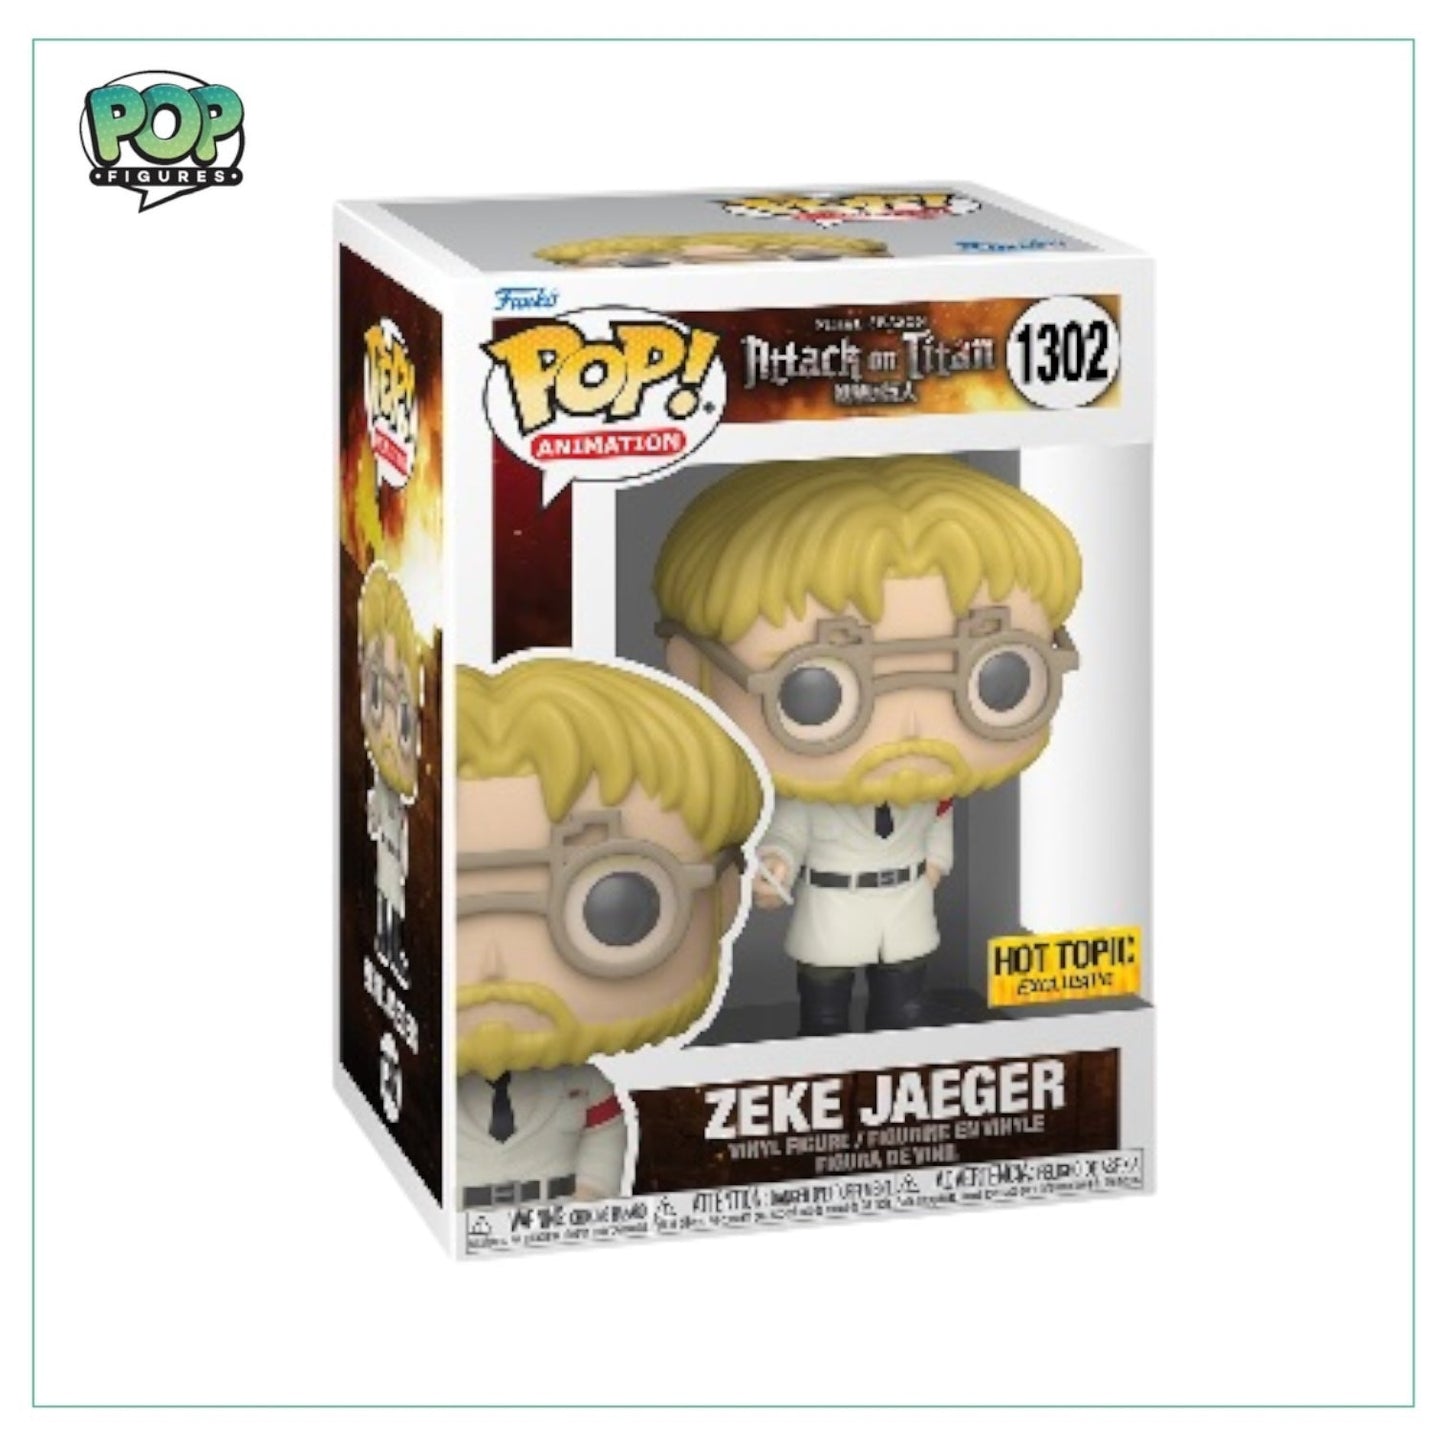 Zeke Jaeger #1302 Funko Pop! - Attack on Titan - Hot Topic Exclusive - Angry Cat